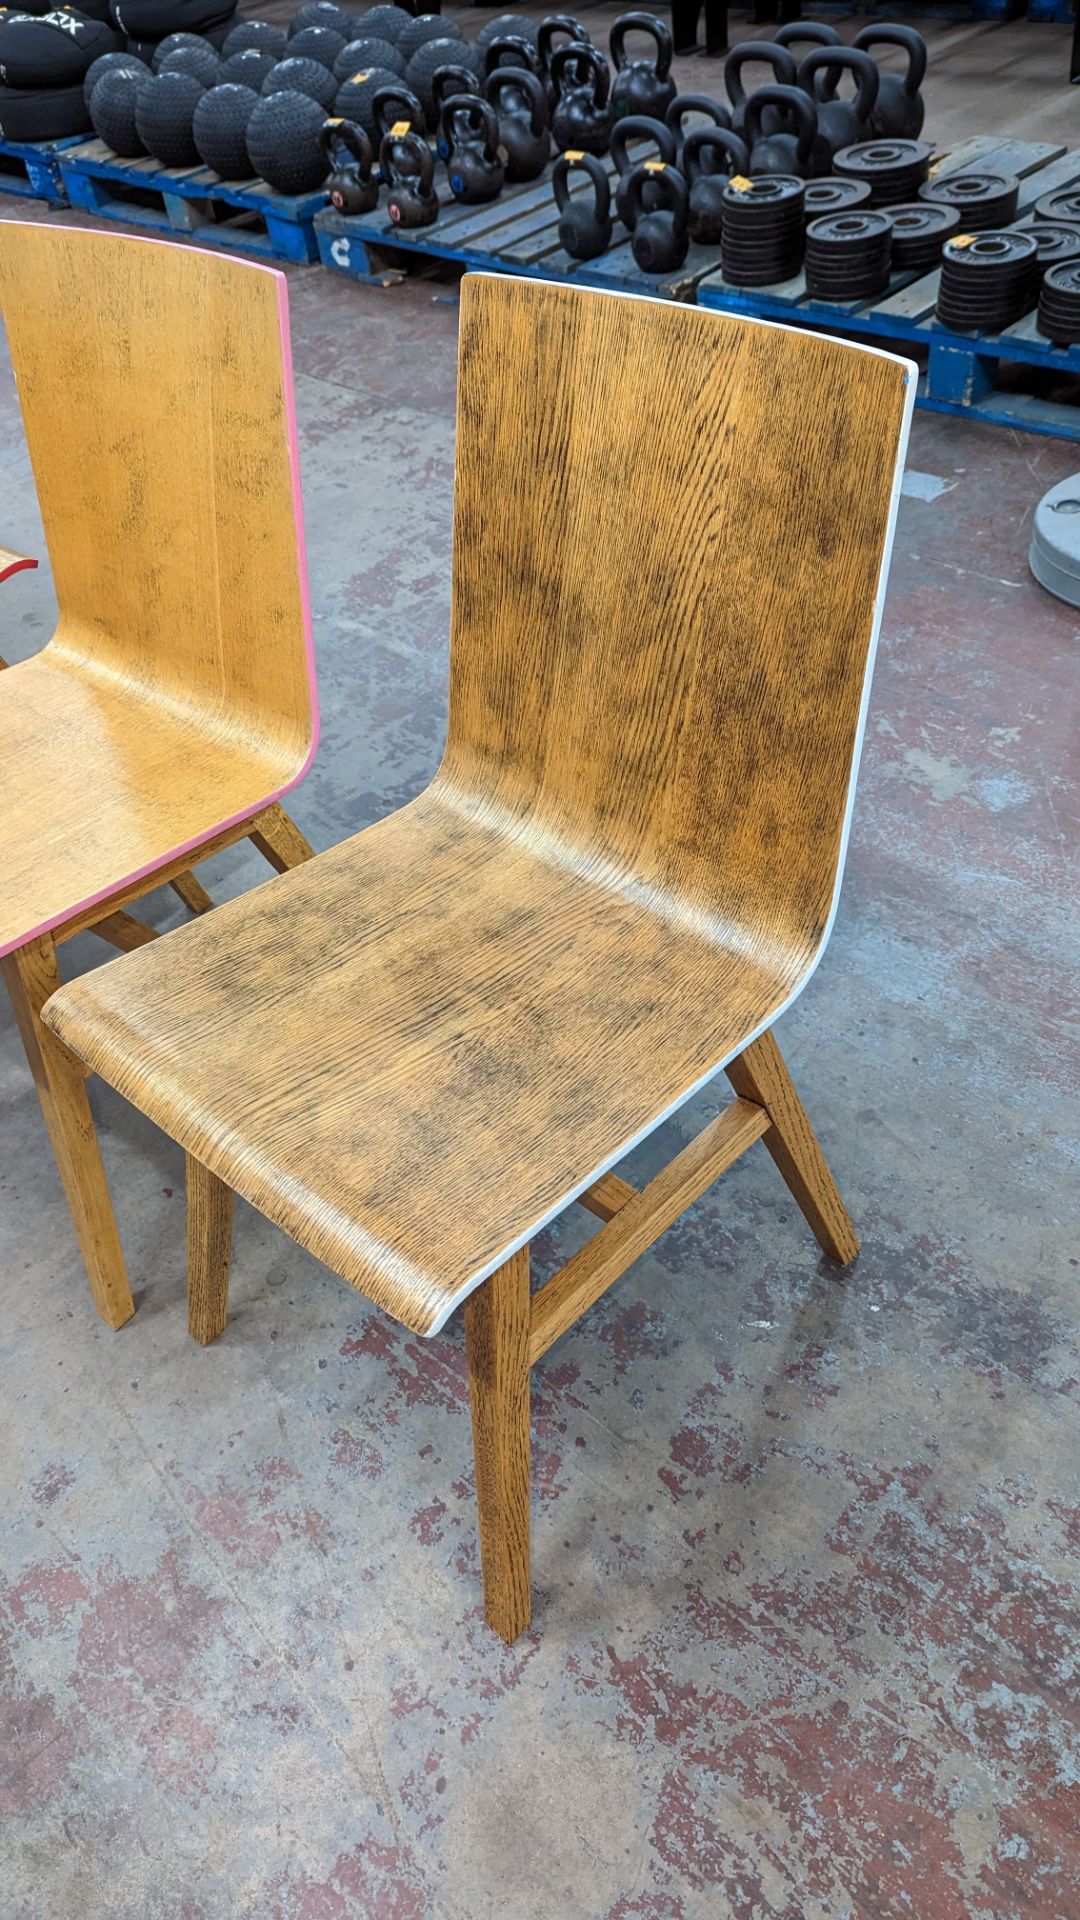 5 off wooden chairs which are understood to have been hand varnished and individually painted with a - Image 3 of 9